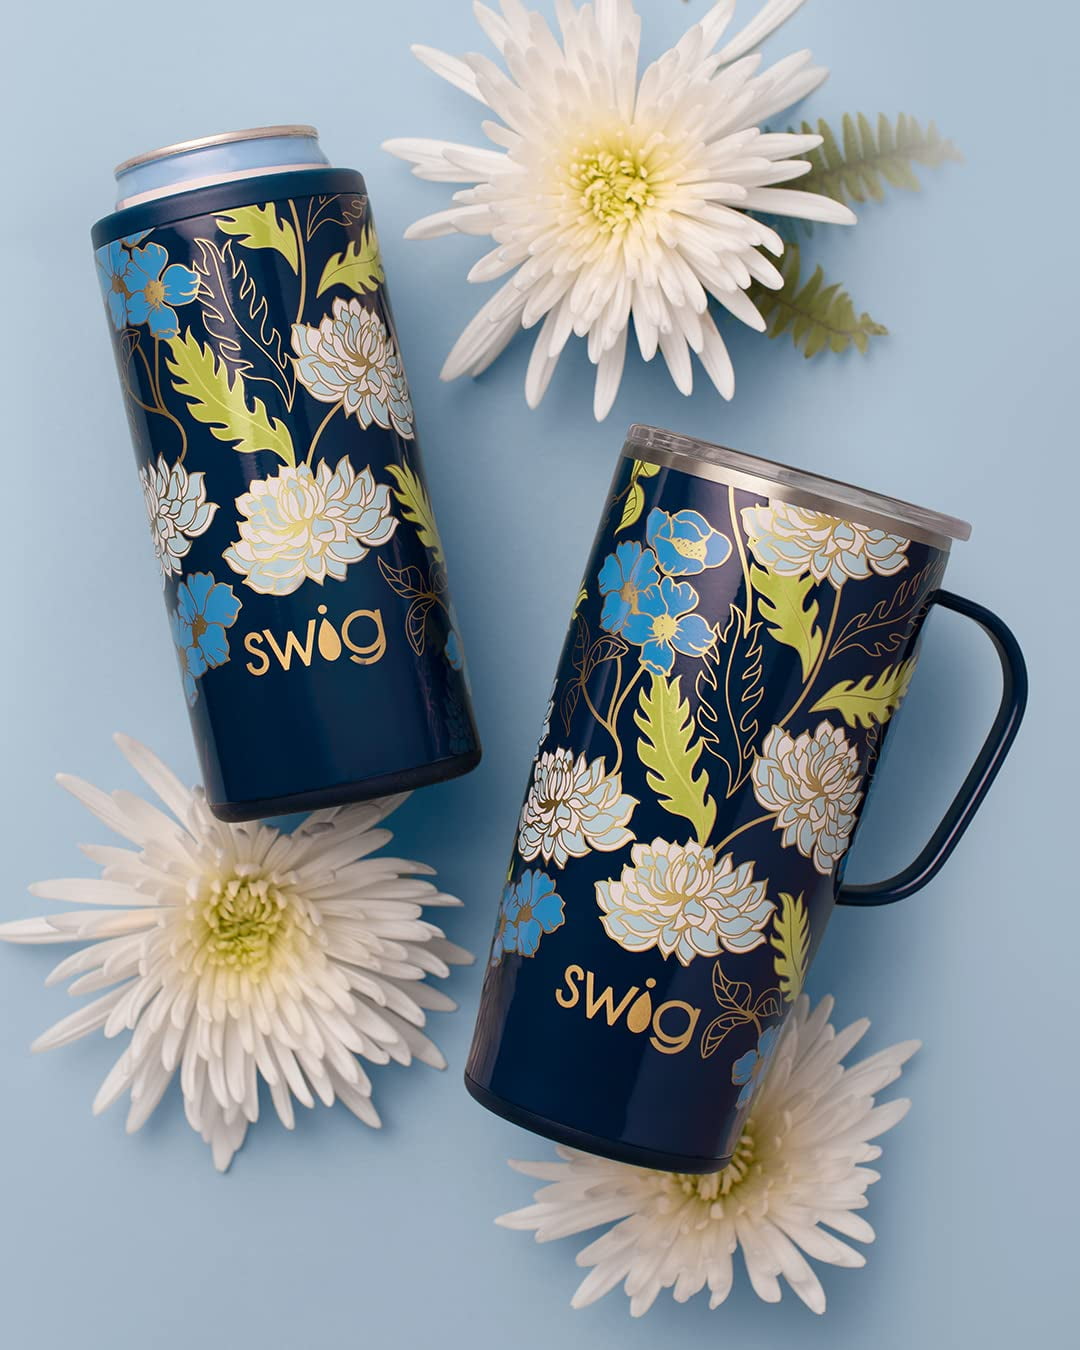 Swig Life 22oz Travel Mug | Insulated Tumbler with Handle and Lid, Cup  Holder Friendly, Dishwasher S…See more Swig Life 22oz Travel Mug |  Insulated